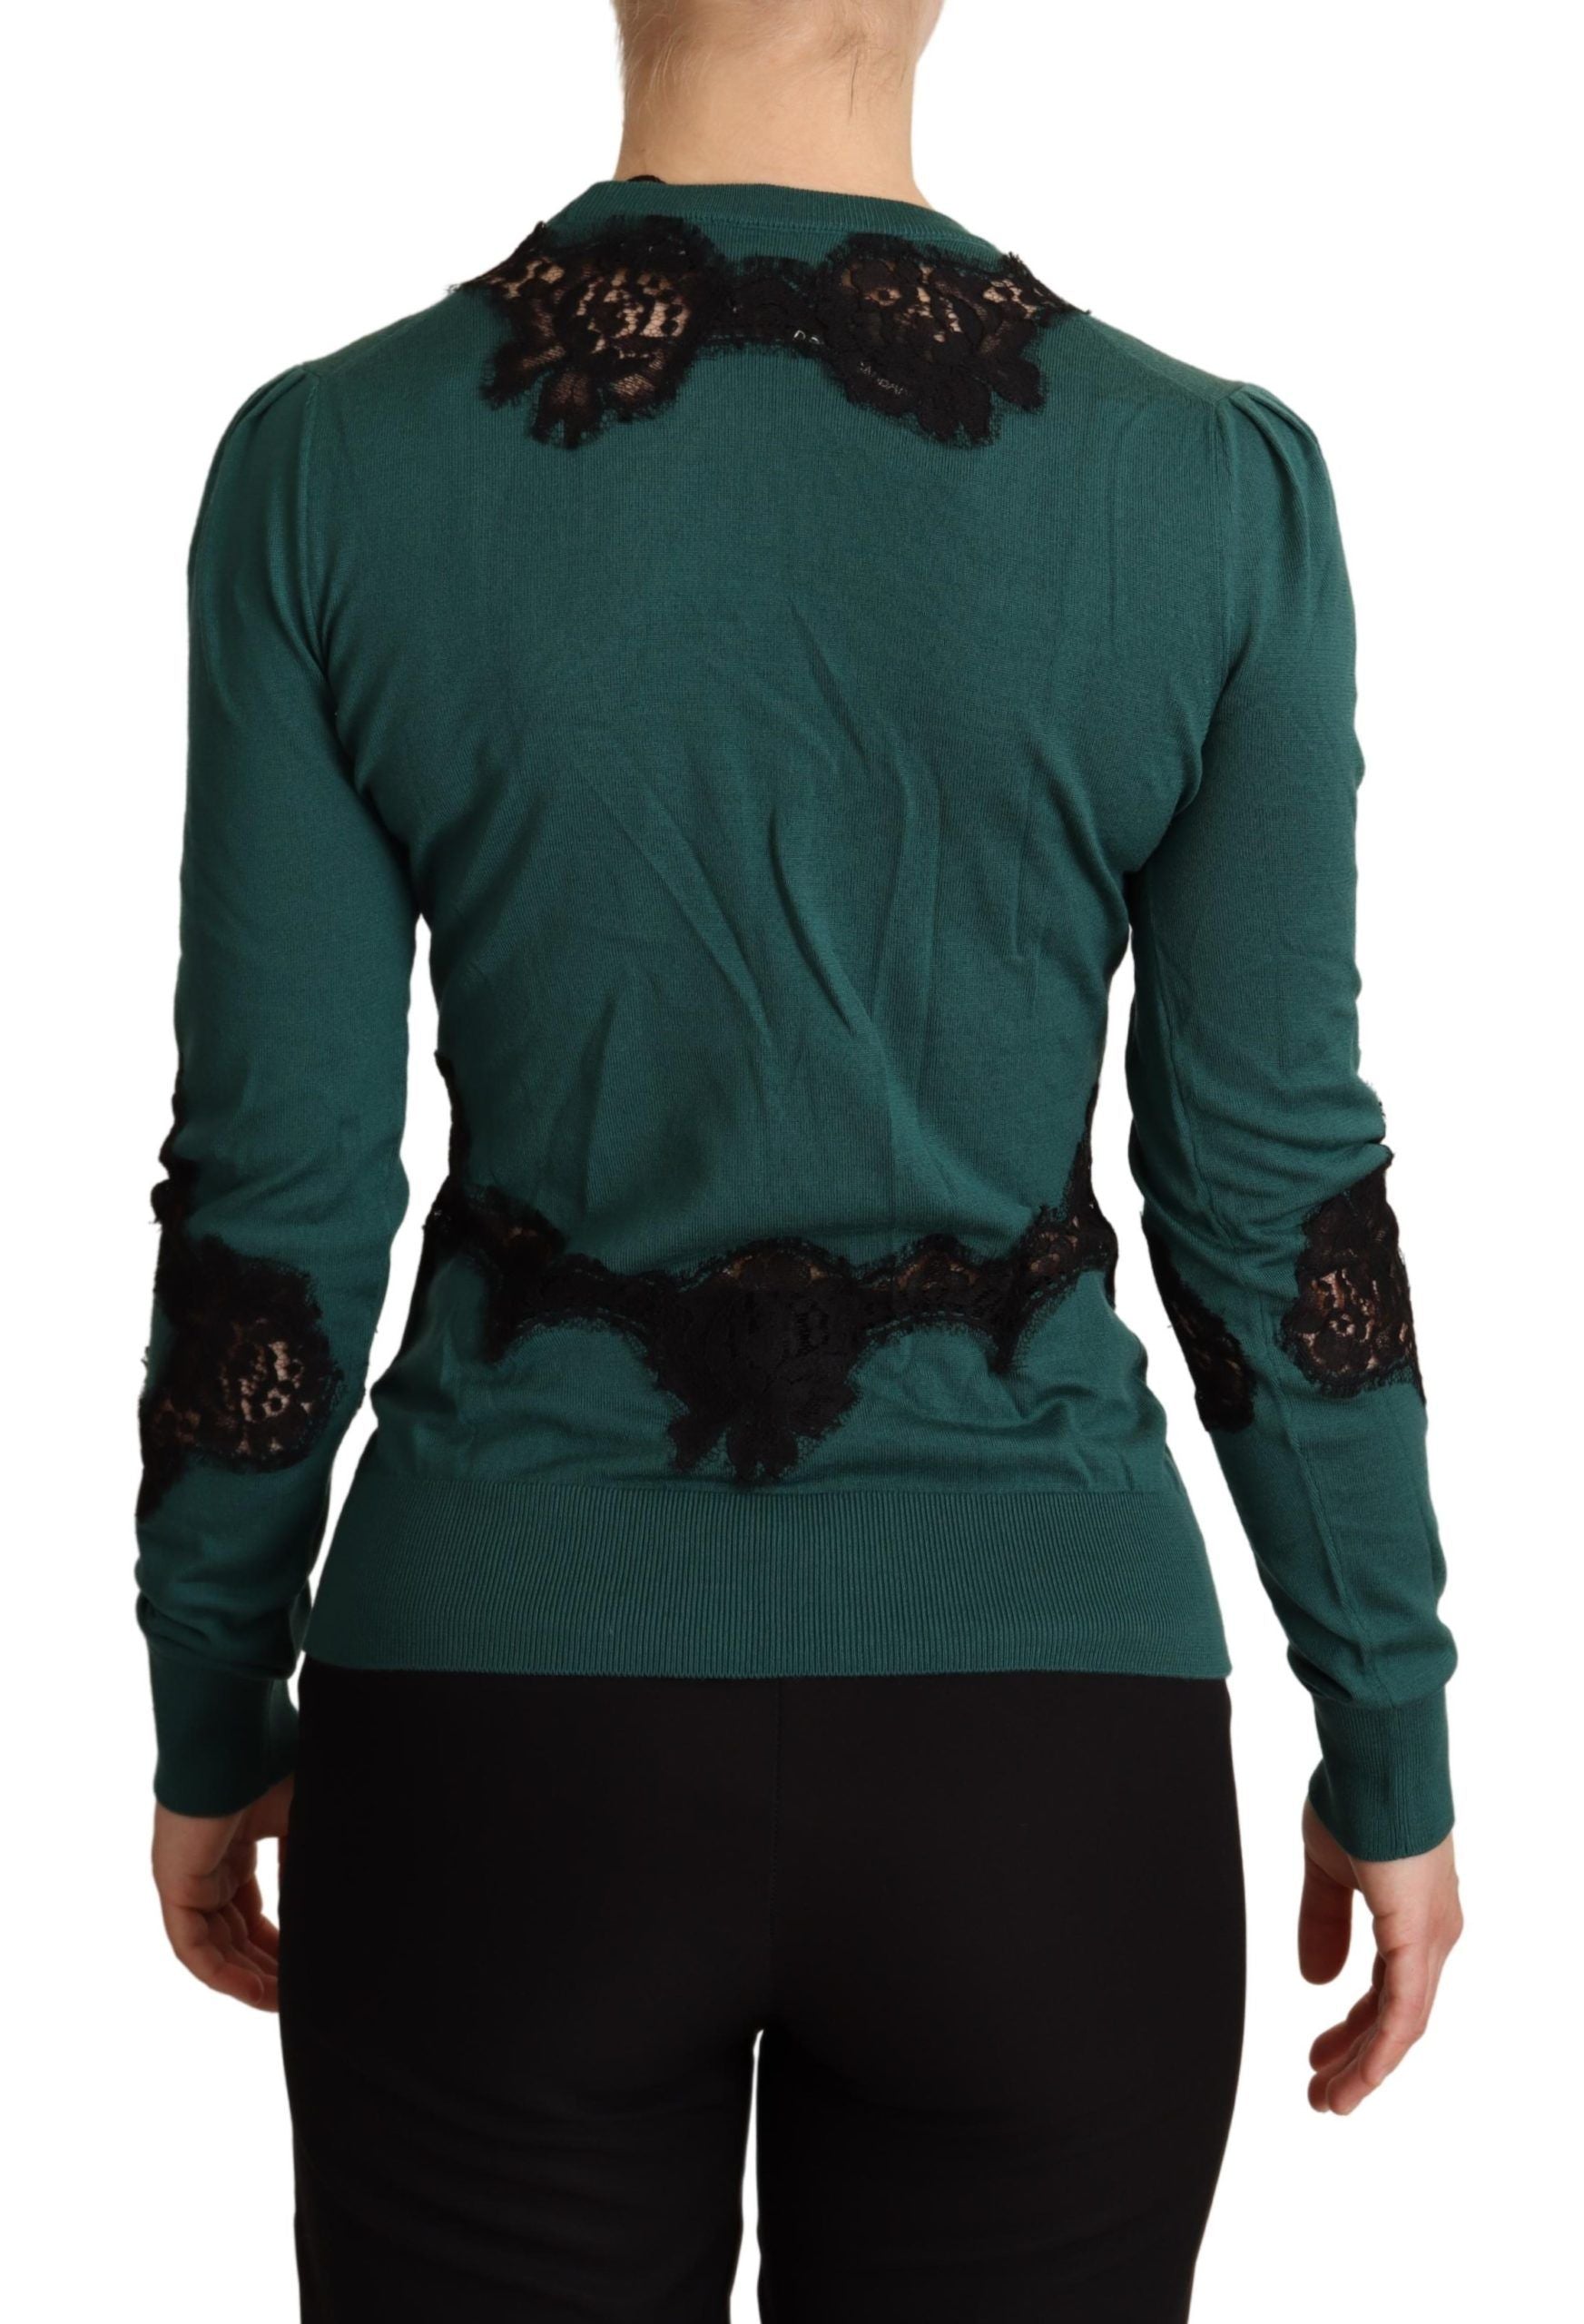 Elegant Green Pullover with Black Lace Detail